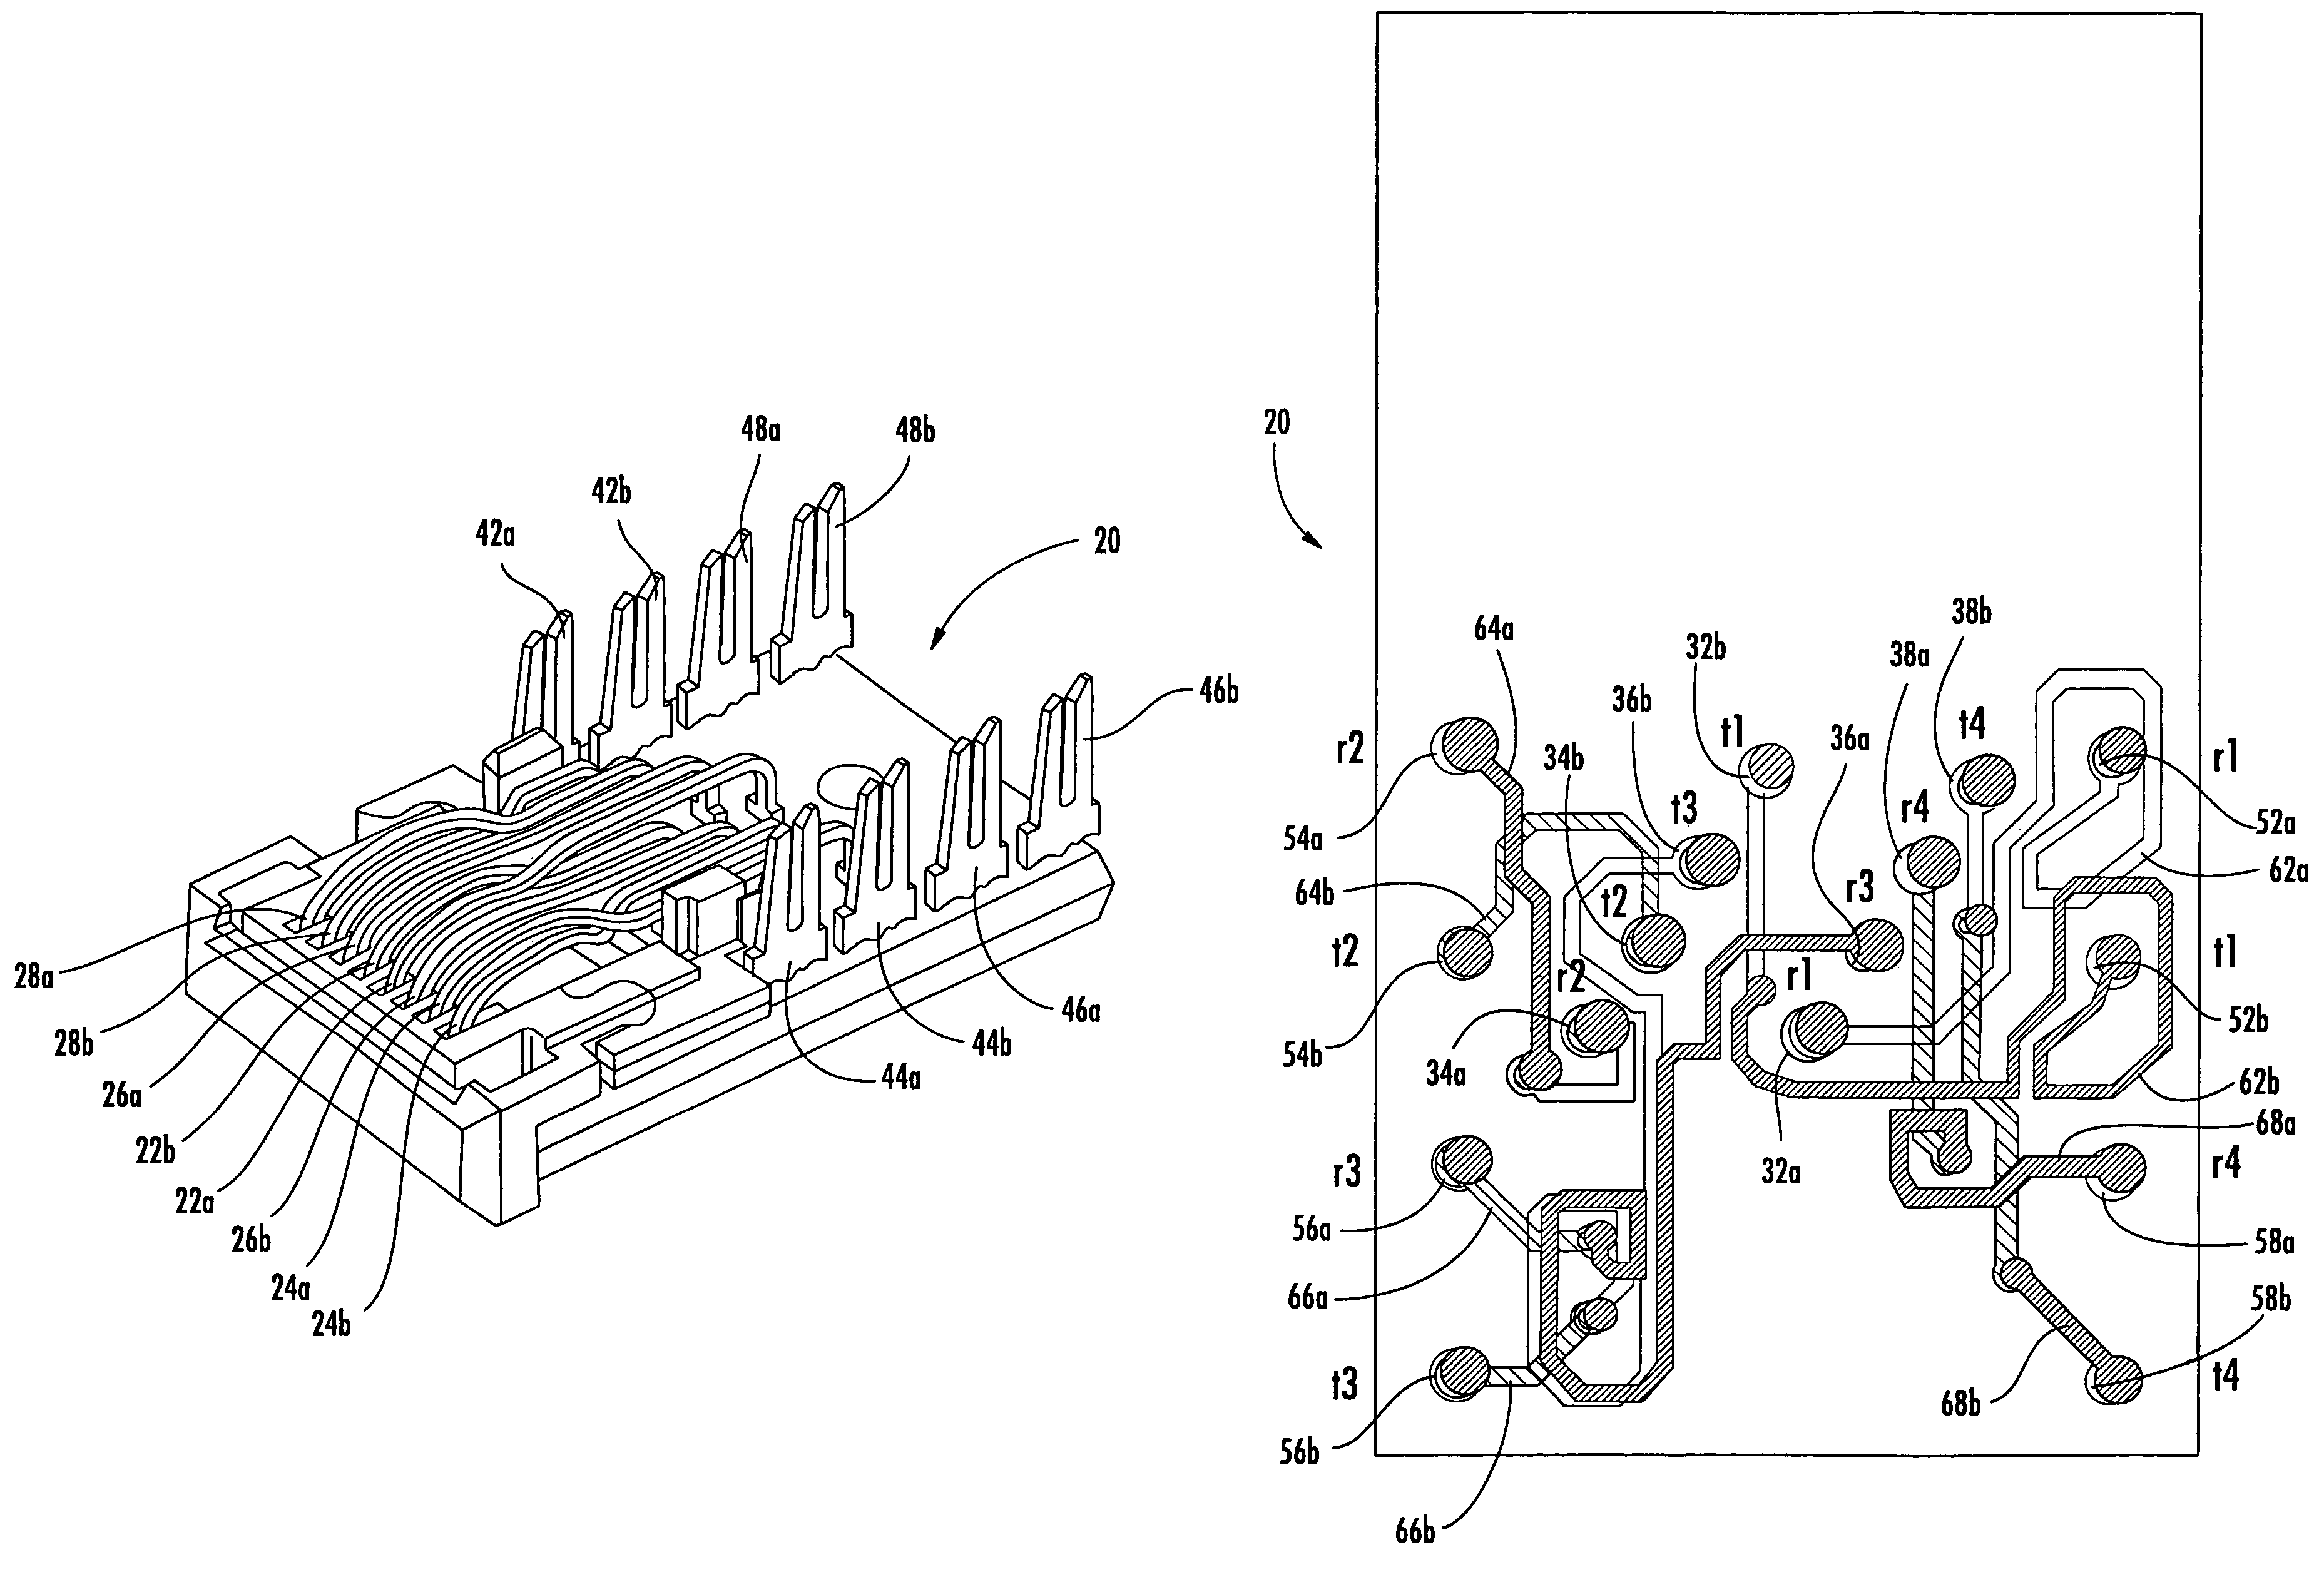 Communications jack with printed wiring board having self-coupling conductors